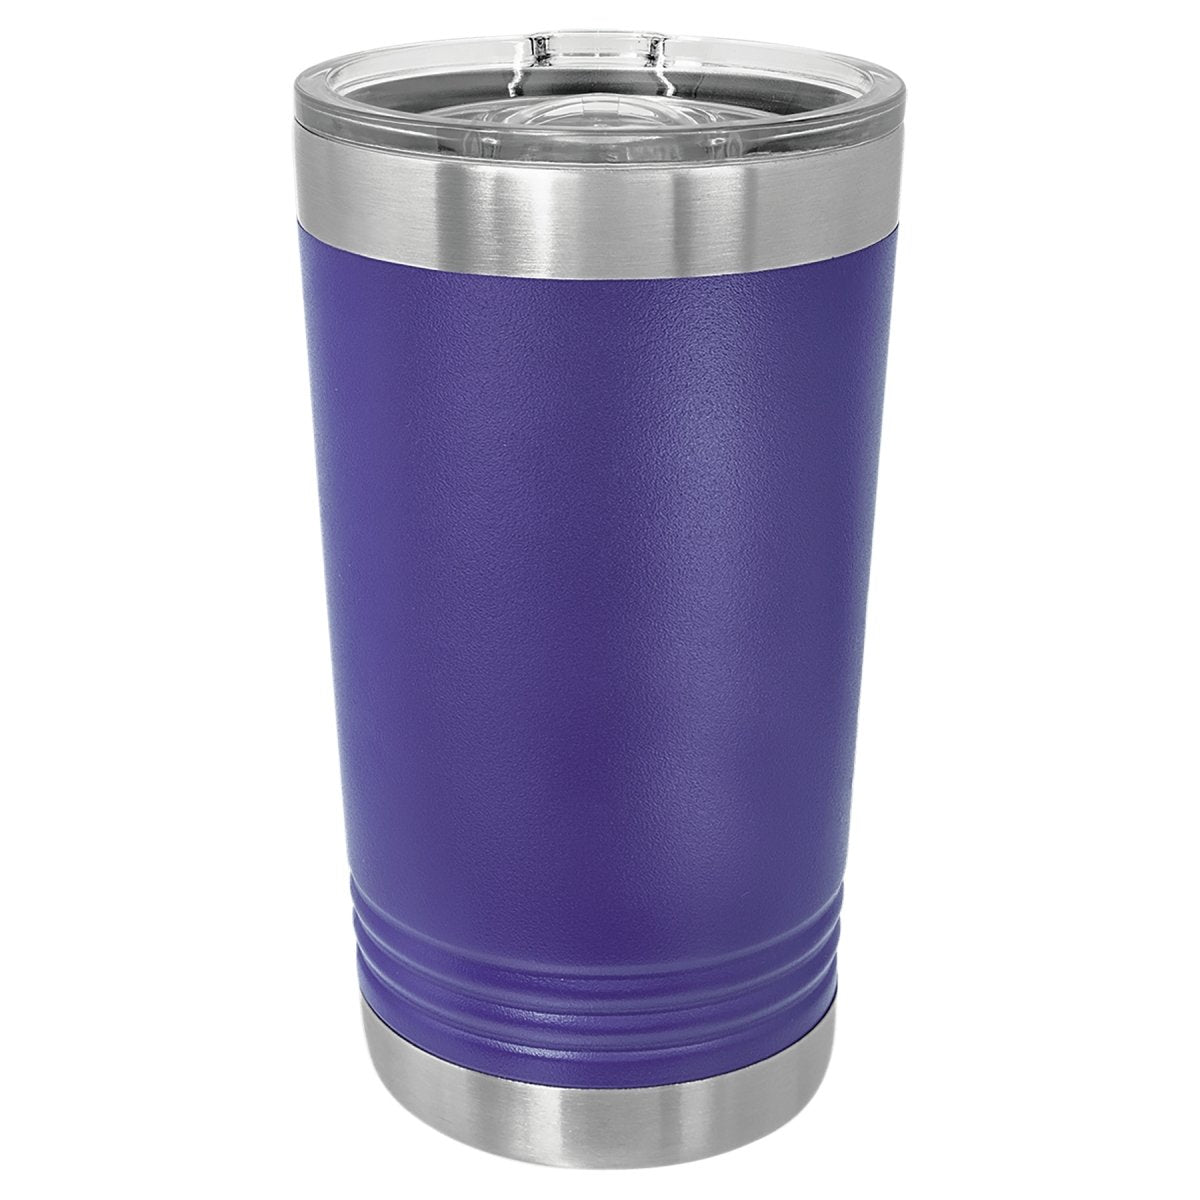 16oz Stainless Steel & Powder Coated Pint Tumbler with Slider Lid - The Luua Company